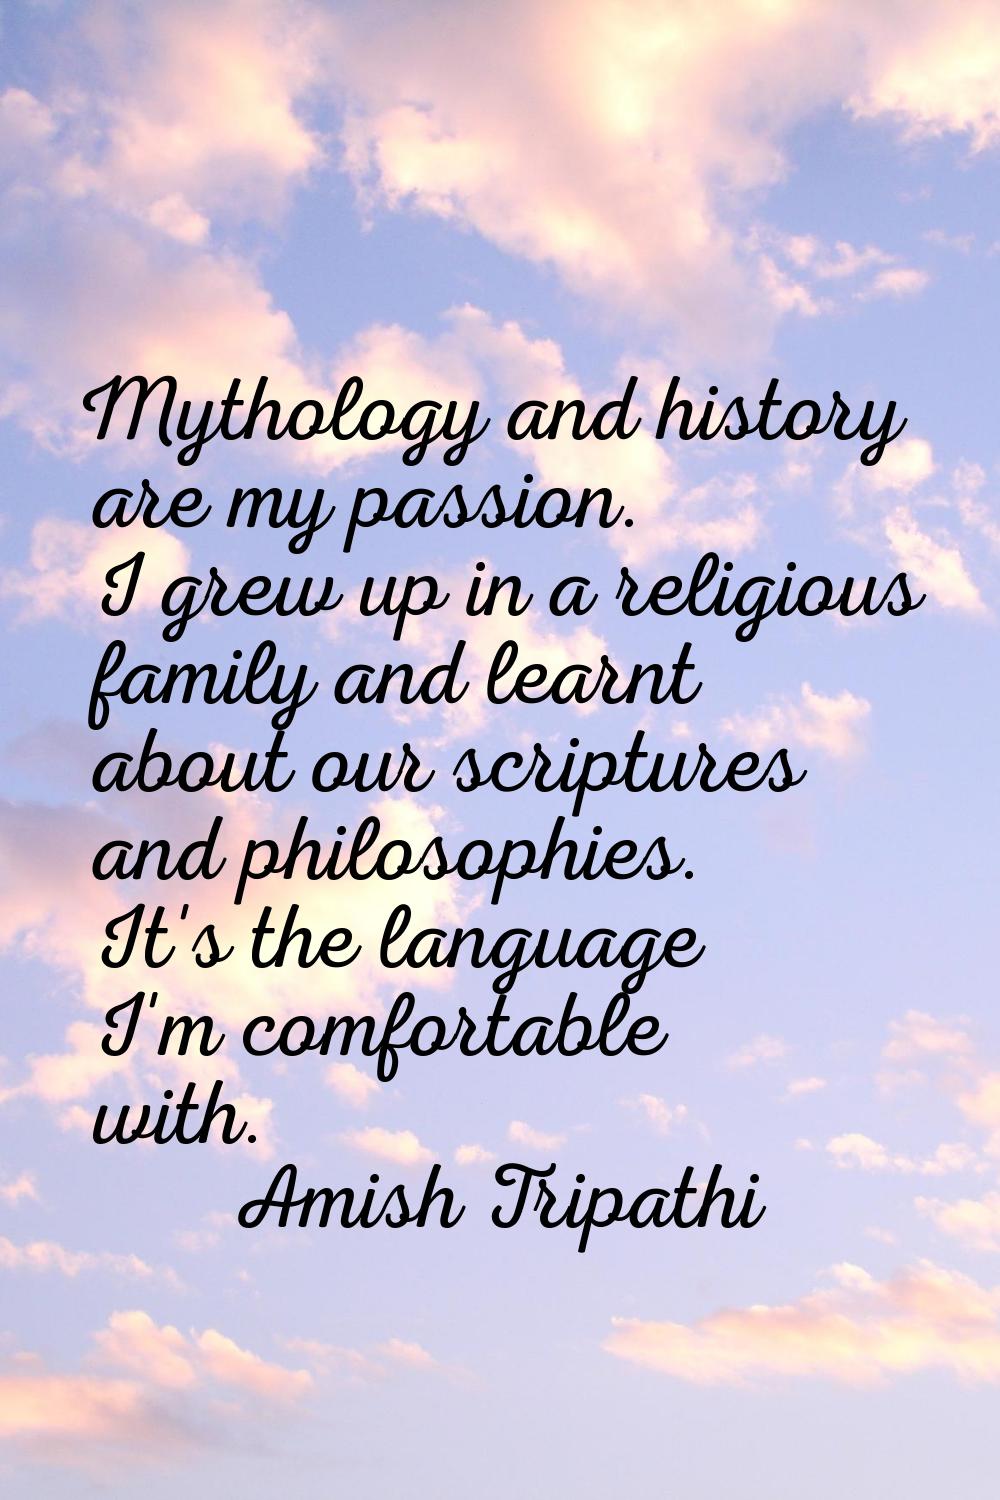 Mythology and history are my passion. I grew up in a religious family and learnt about our scriptur